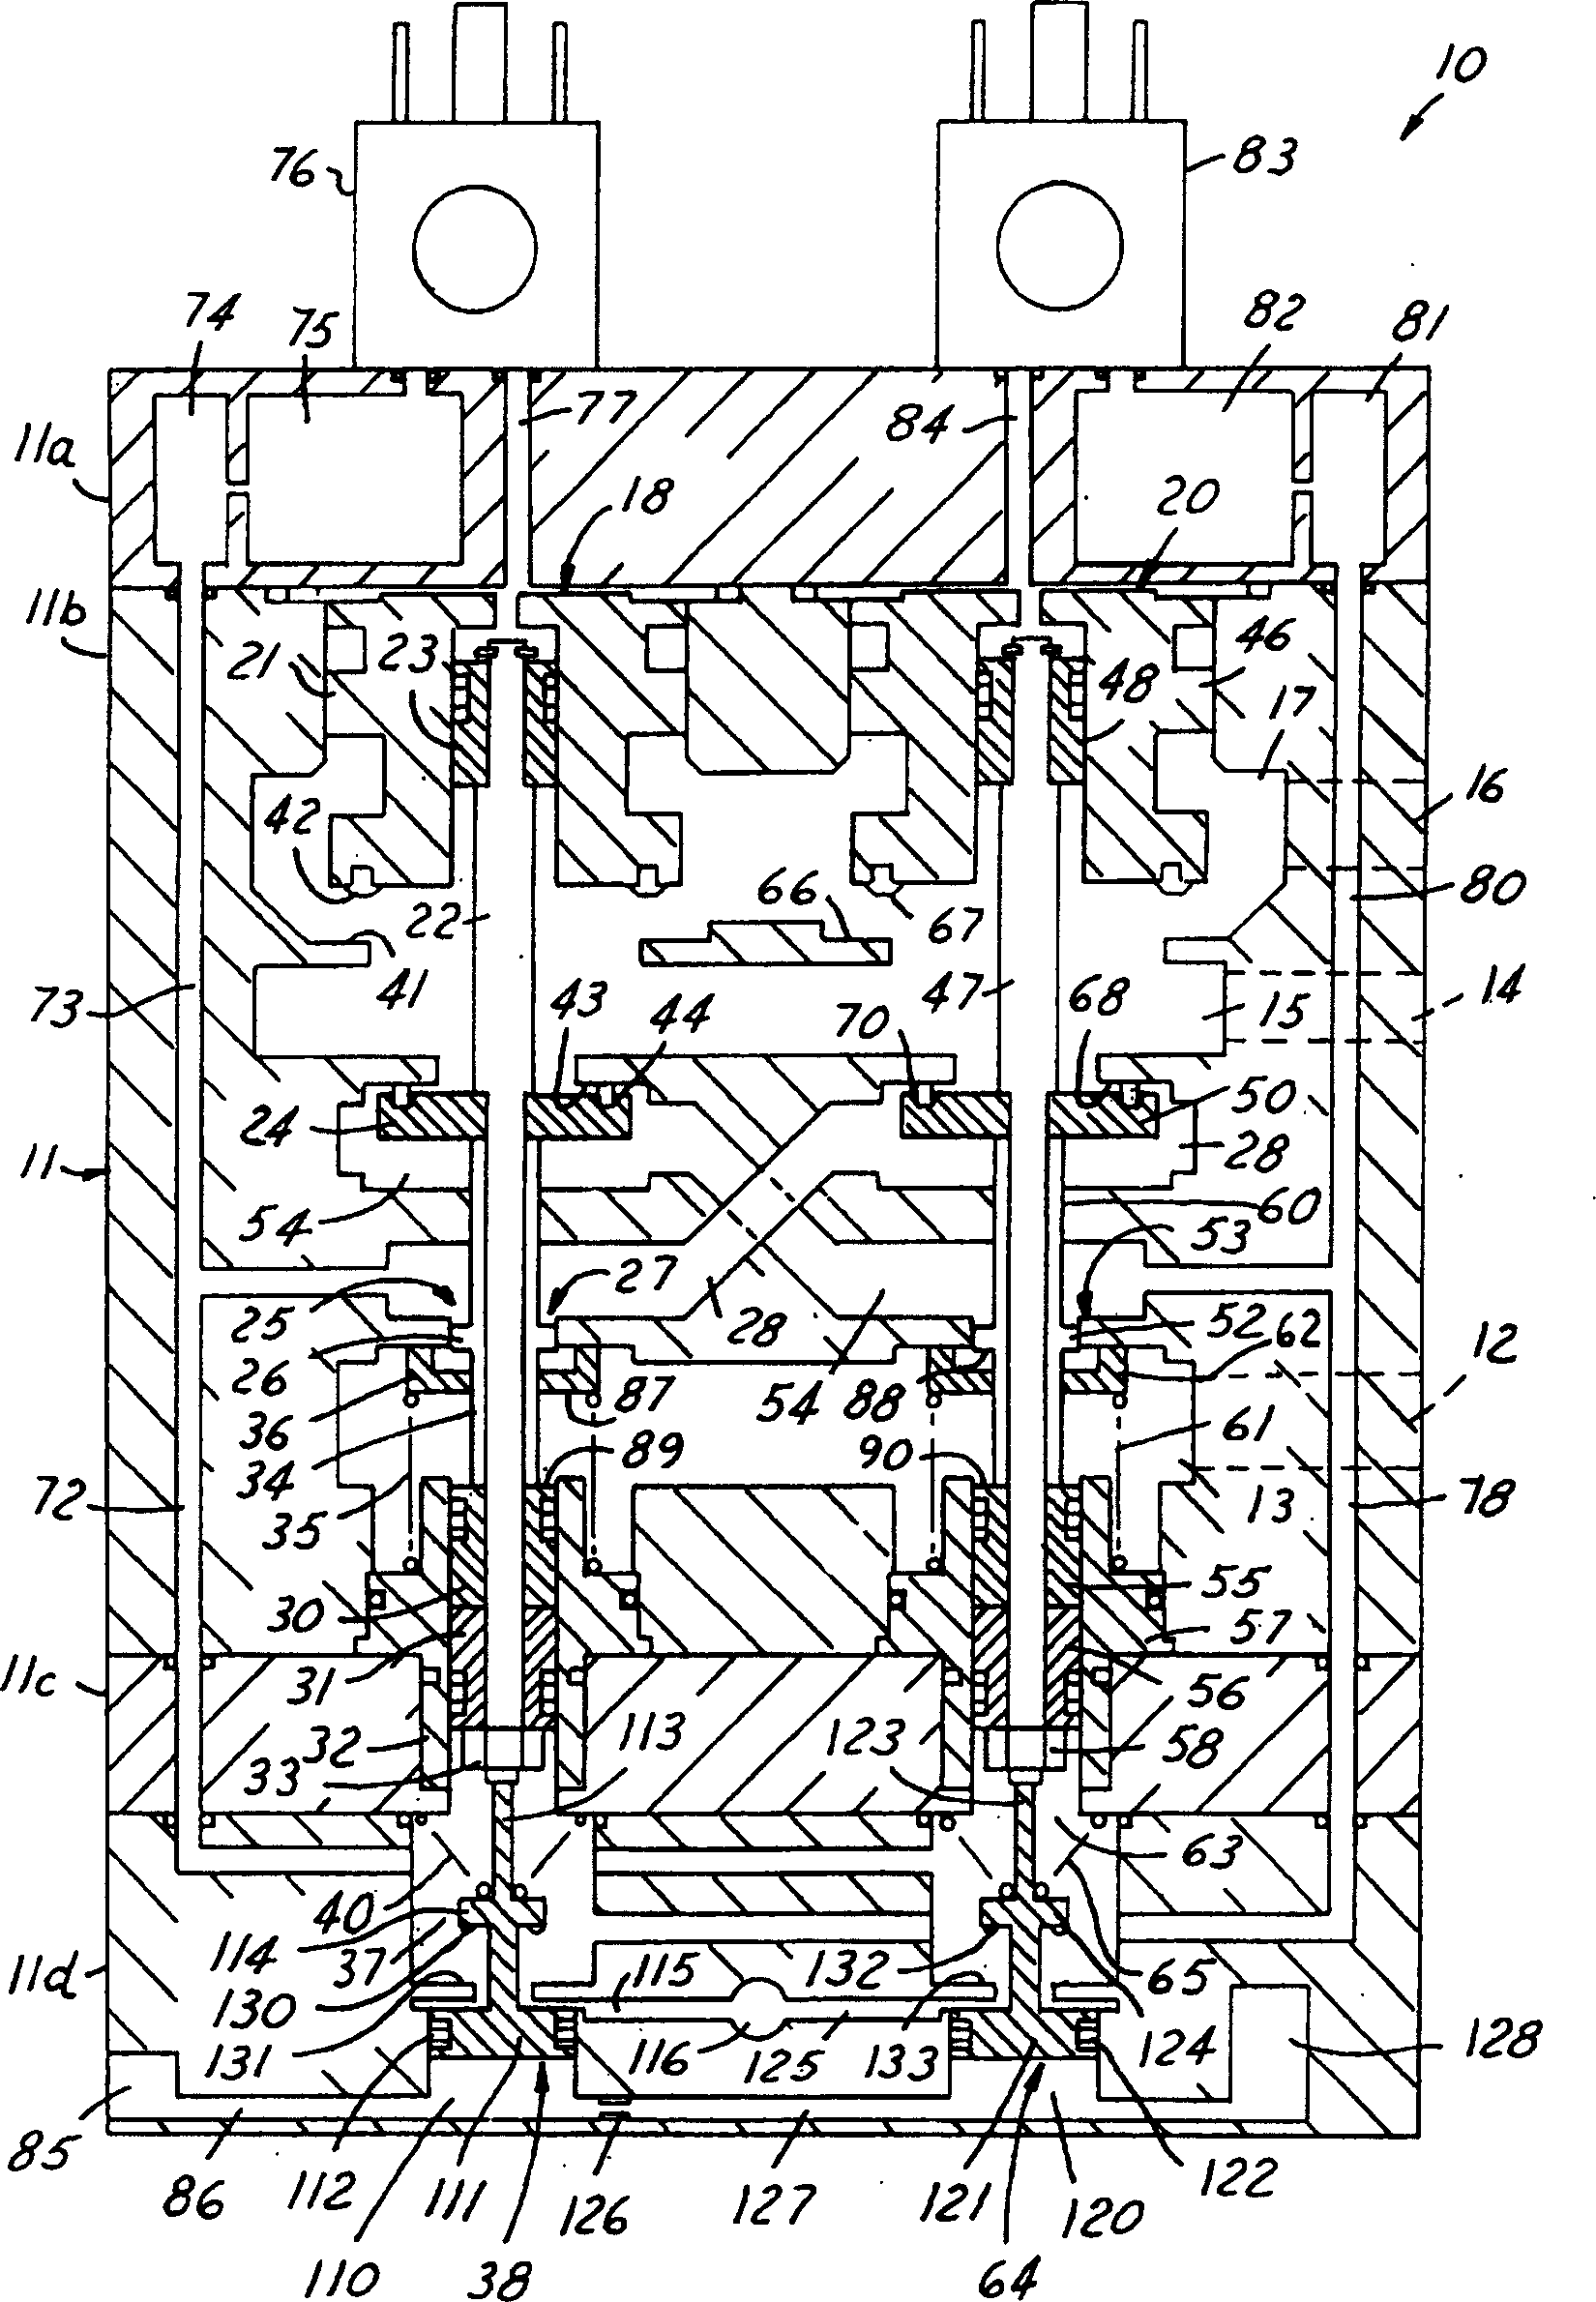 Dynamically-monitored double valve with anti-tiedown feature